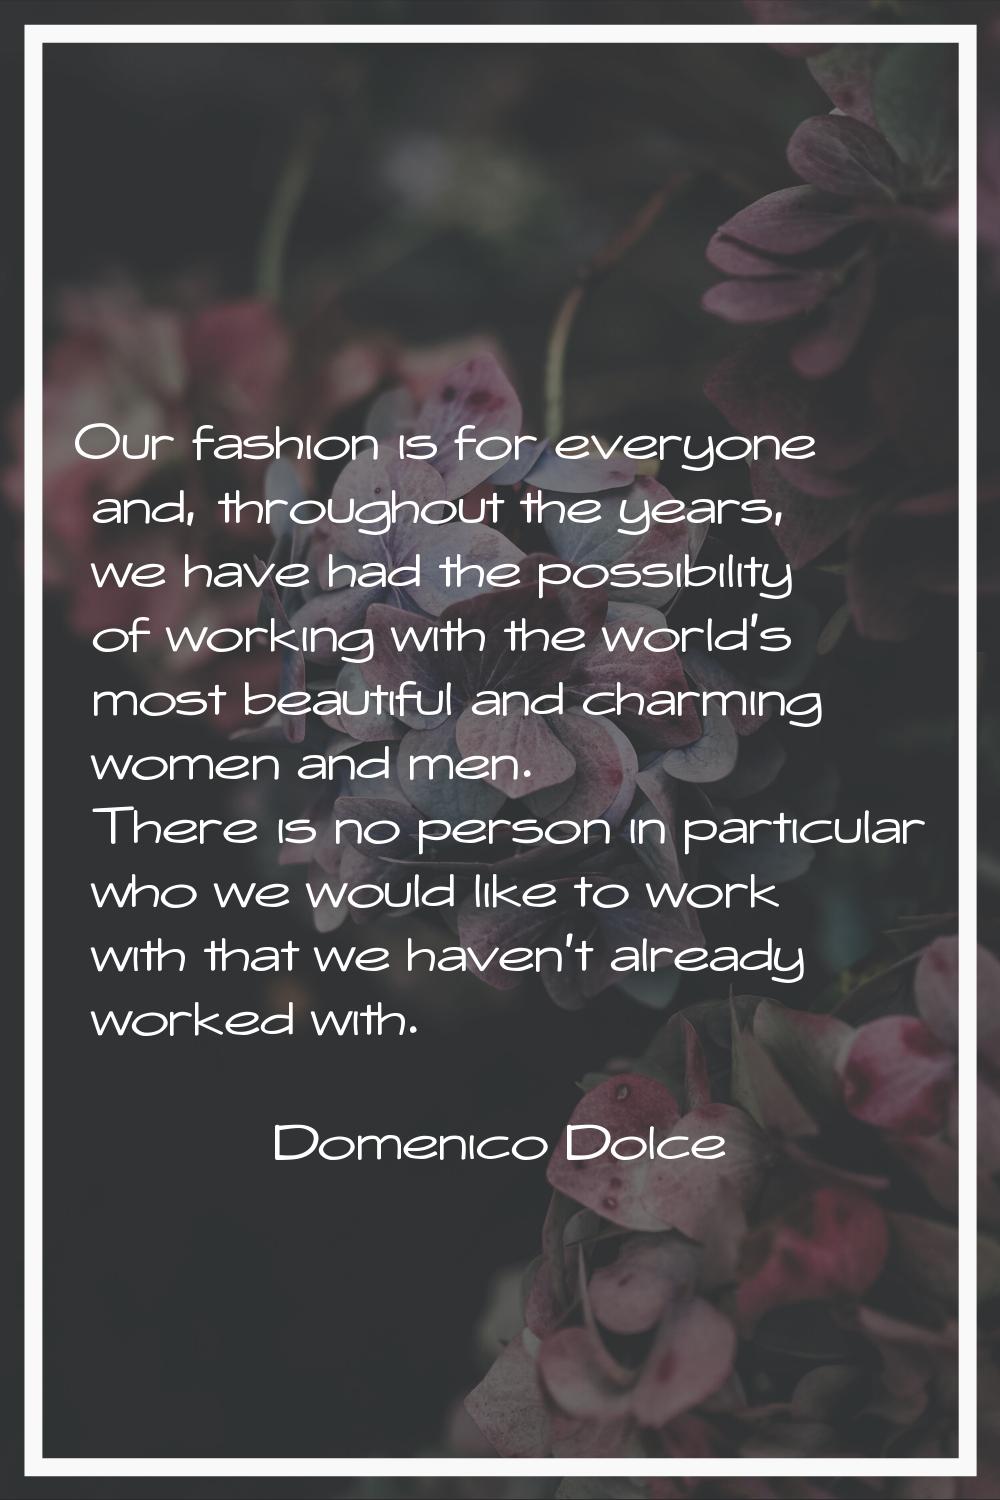 Our fashion is for everyone and, throughout the years, we have had the possibility of working with 